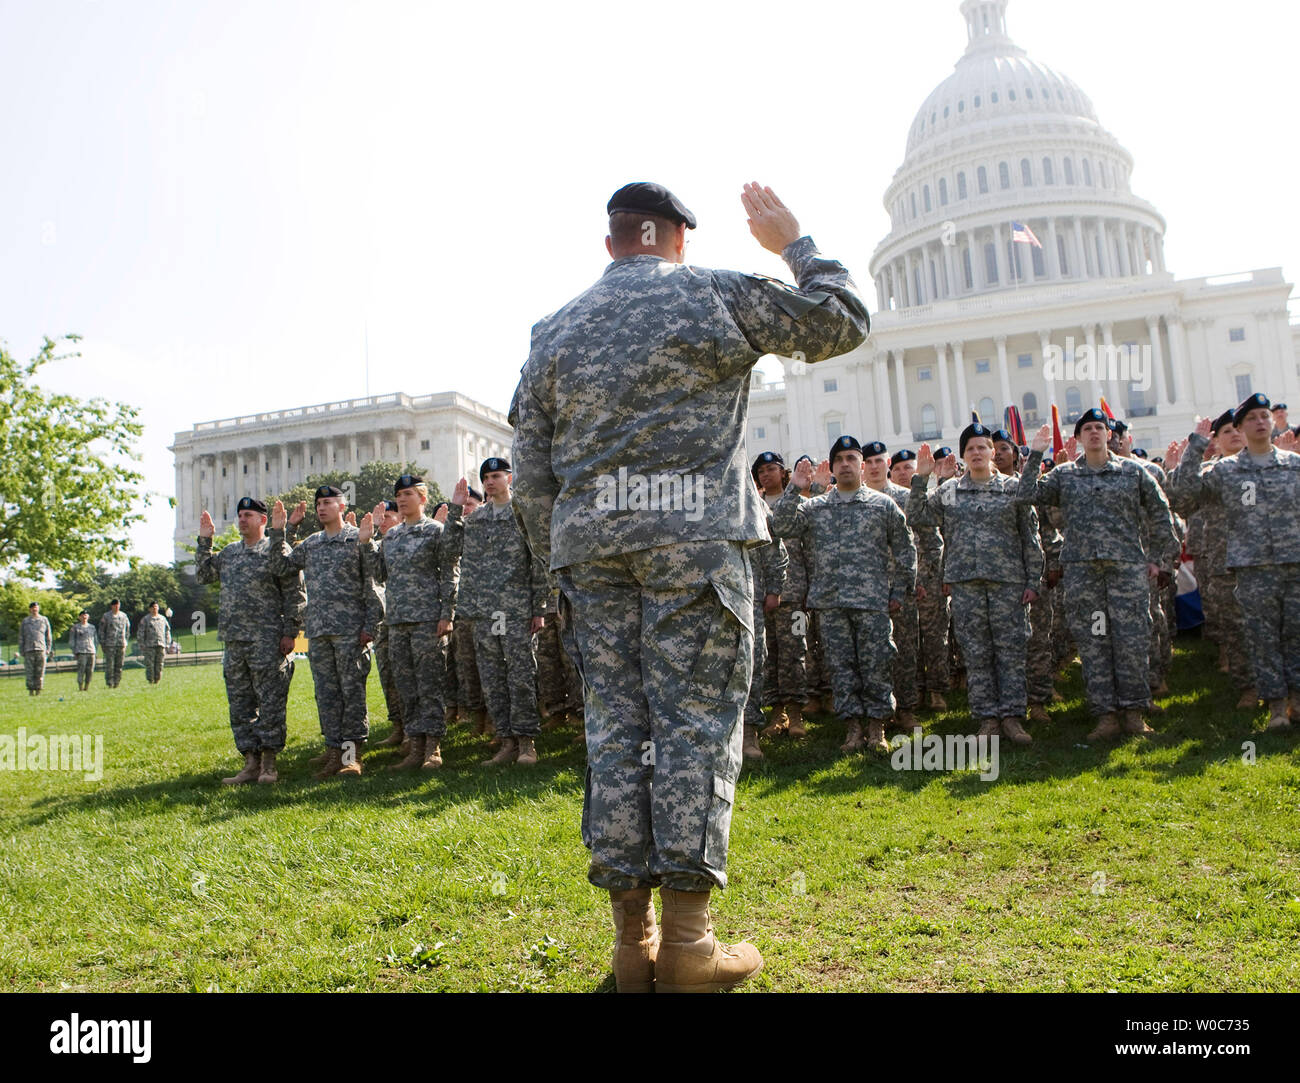 Army Reserve Chief Lt. Gen. Jack Stultz leads members of the Army Reserve as they are sworn in during an Army Reserve event to re-enlist 100 Reserve soldiers on the west lawn of the Capitol in Washington on April 23, 2008. The ceremony celebrates the 100th Anniversary of the United States Army Reserve and honors its Soldiers and Veterans who have played a vital role in every major U.S military conflict and humanitarian mission. (UPI Photo/Patrick D. McDermott) Stock Photo